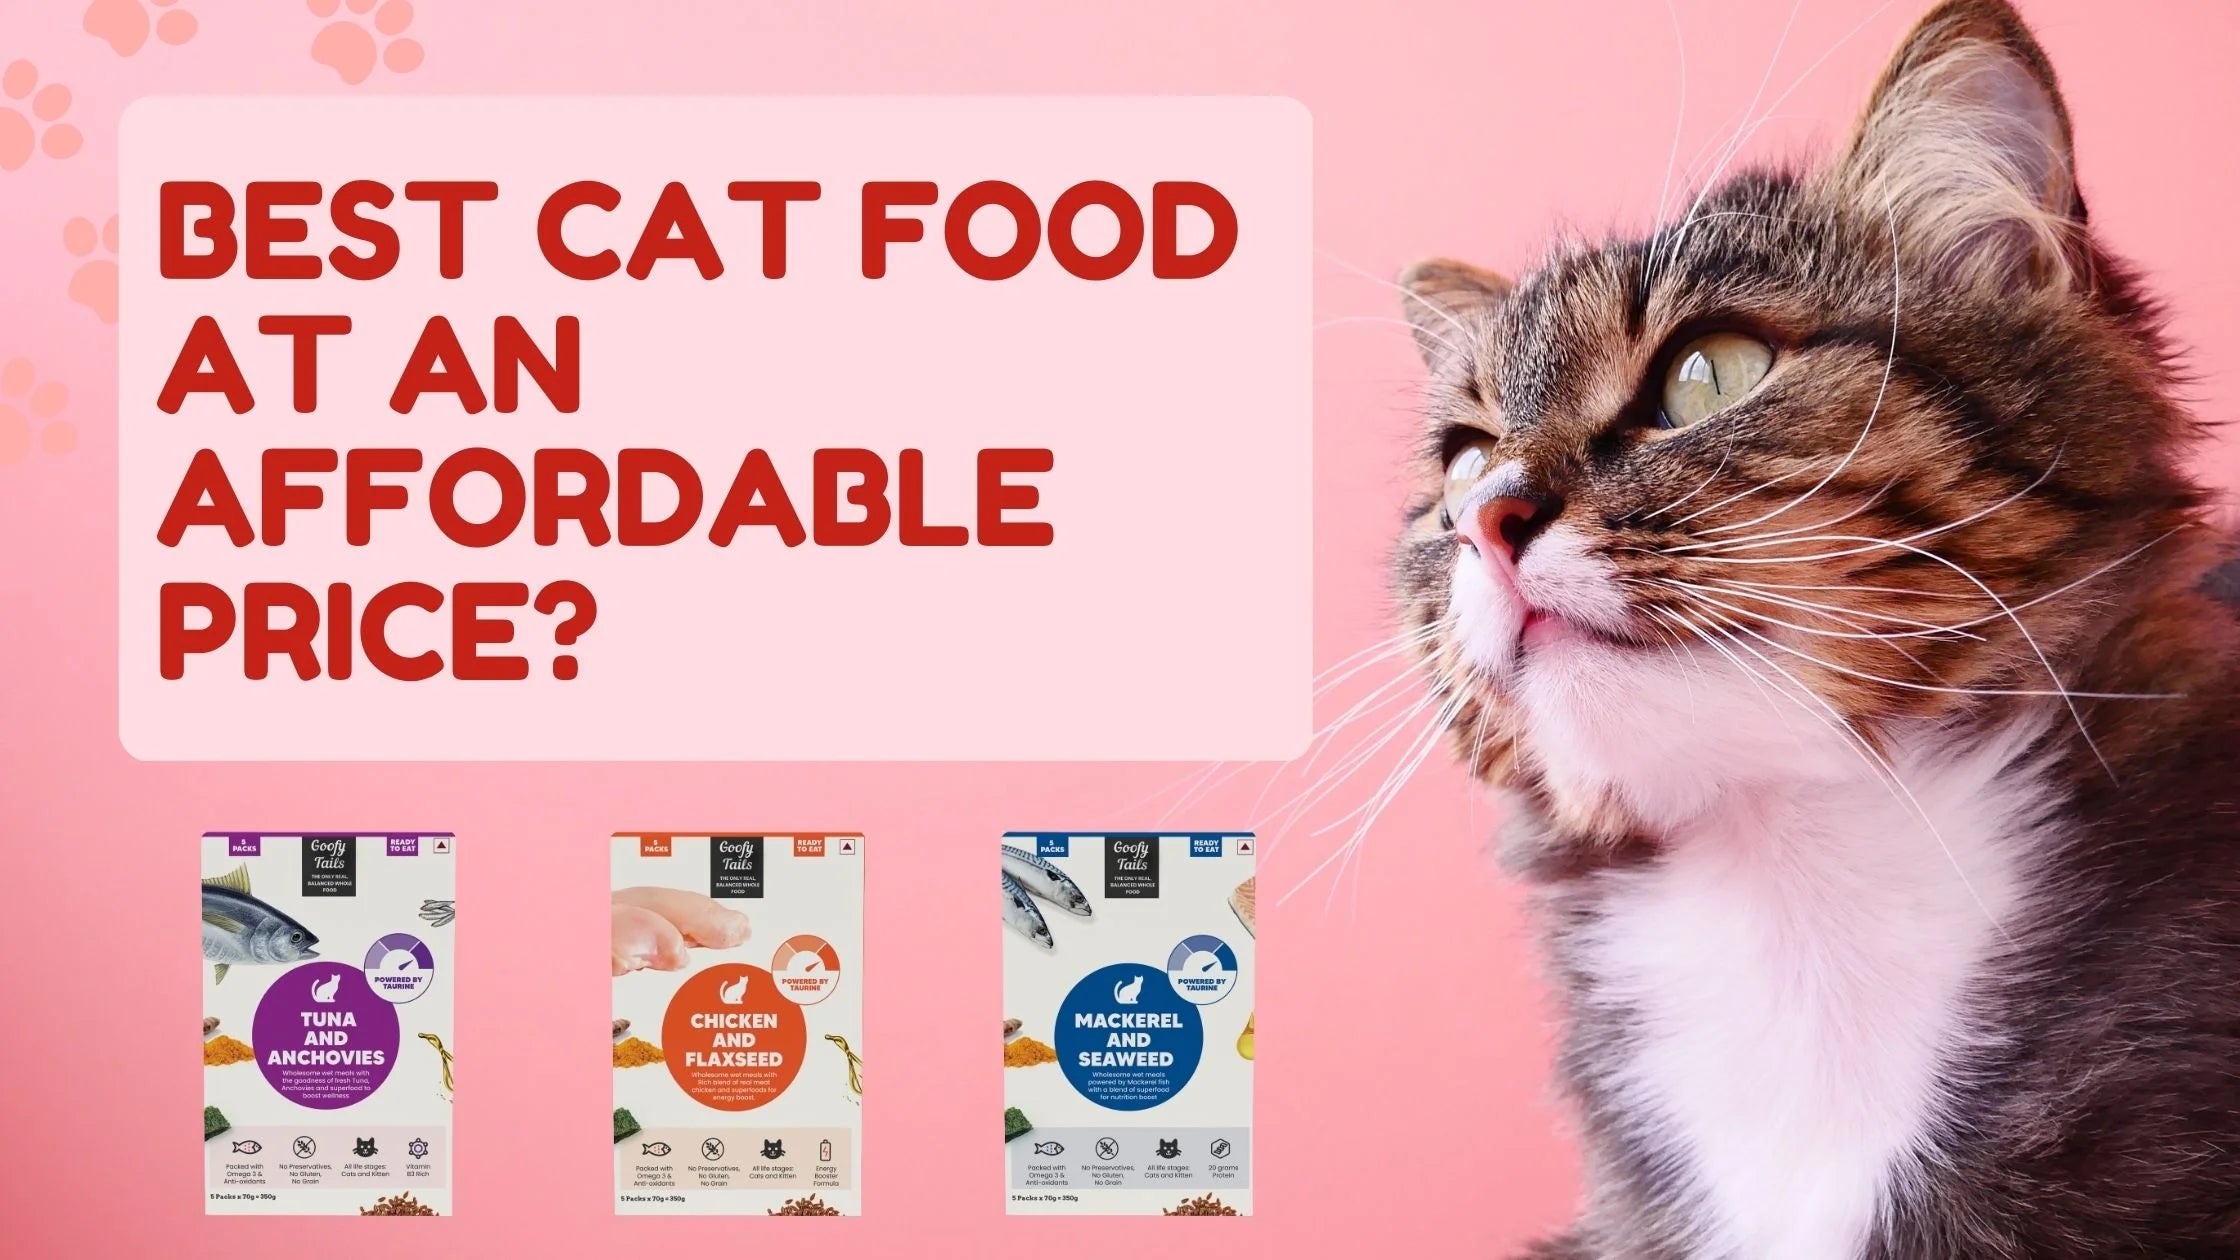 Best cat food at an affordable price?